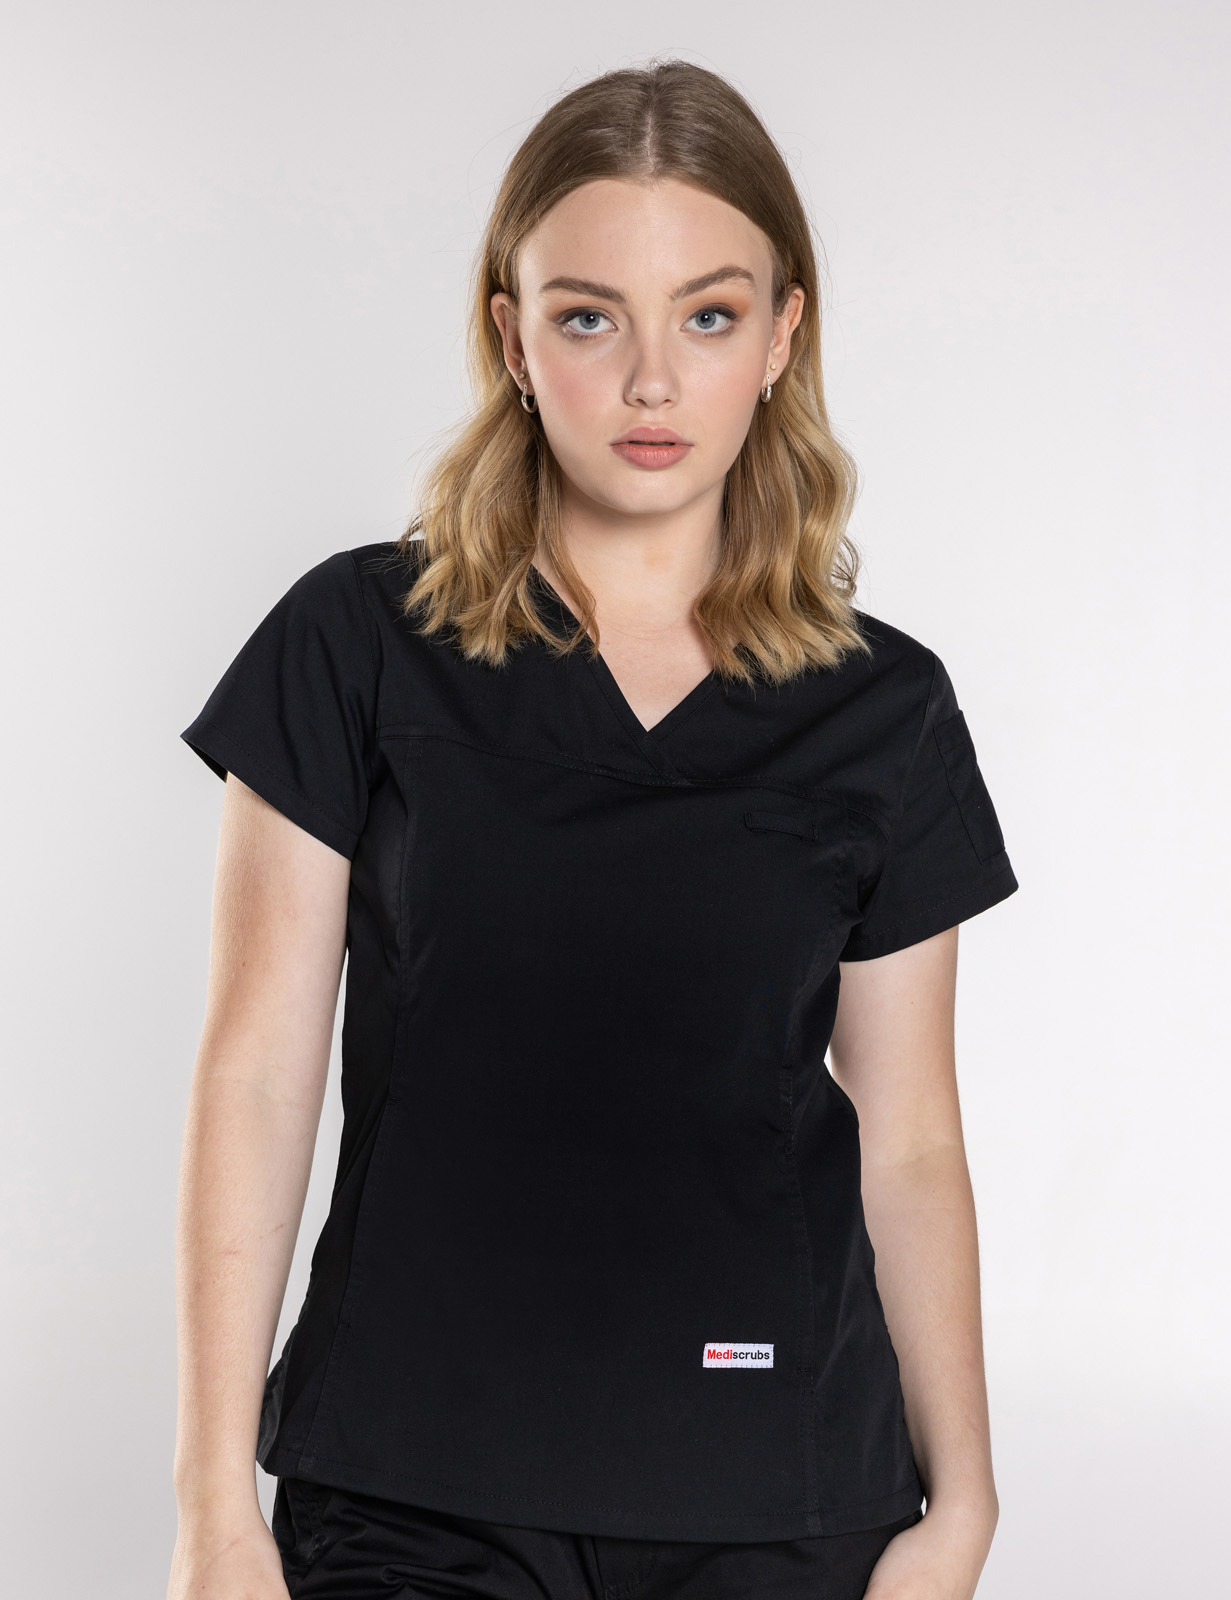 Women's Fit Solid Scrub Top - Black - 5X Large